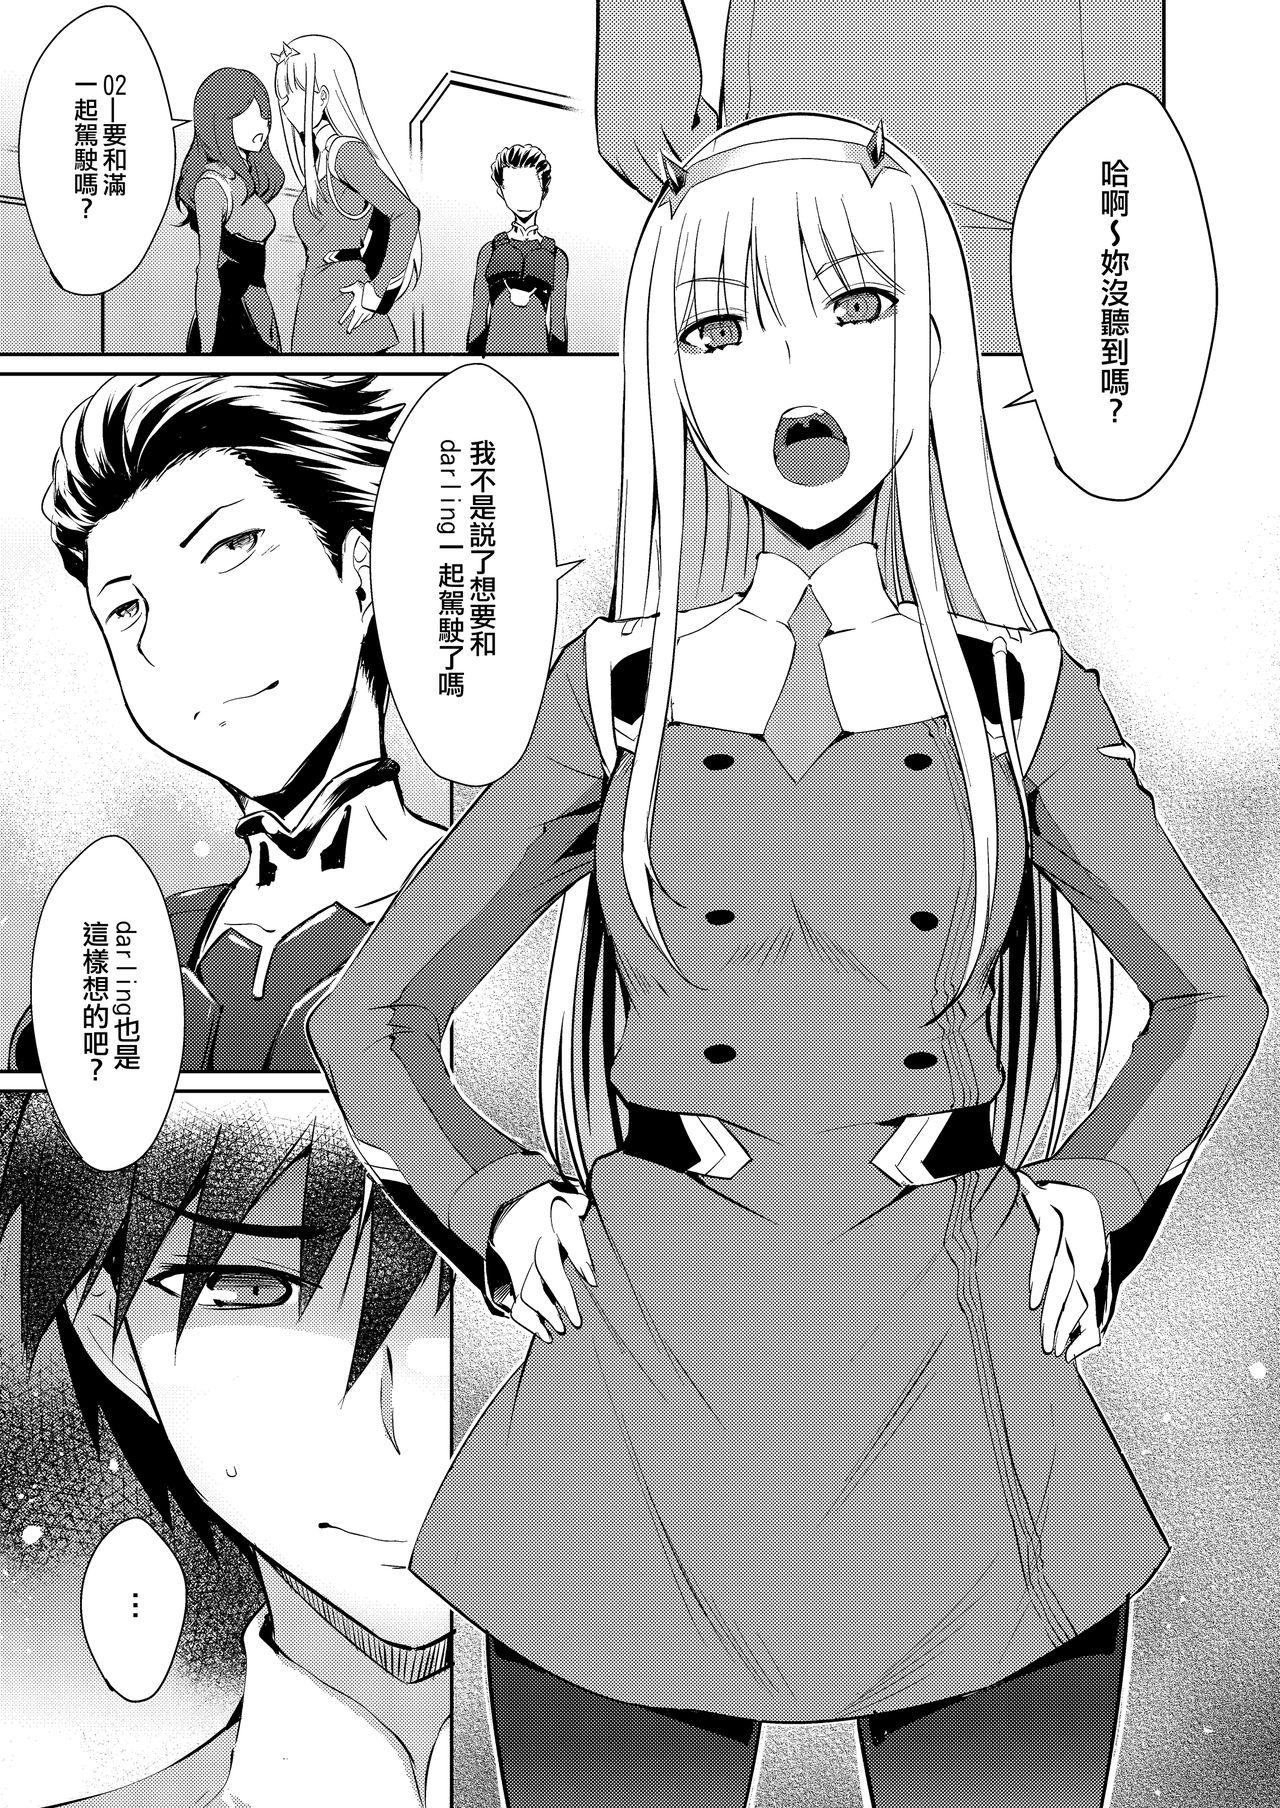 Shemale Sex Mitsuru in the Zero Two - Darling in the franxx Teenies - Page 4